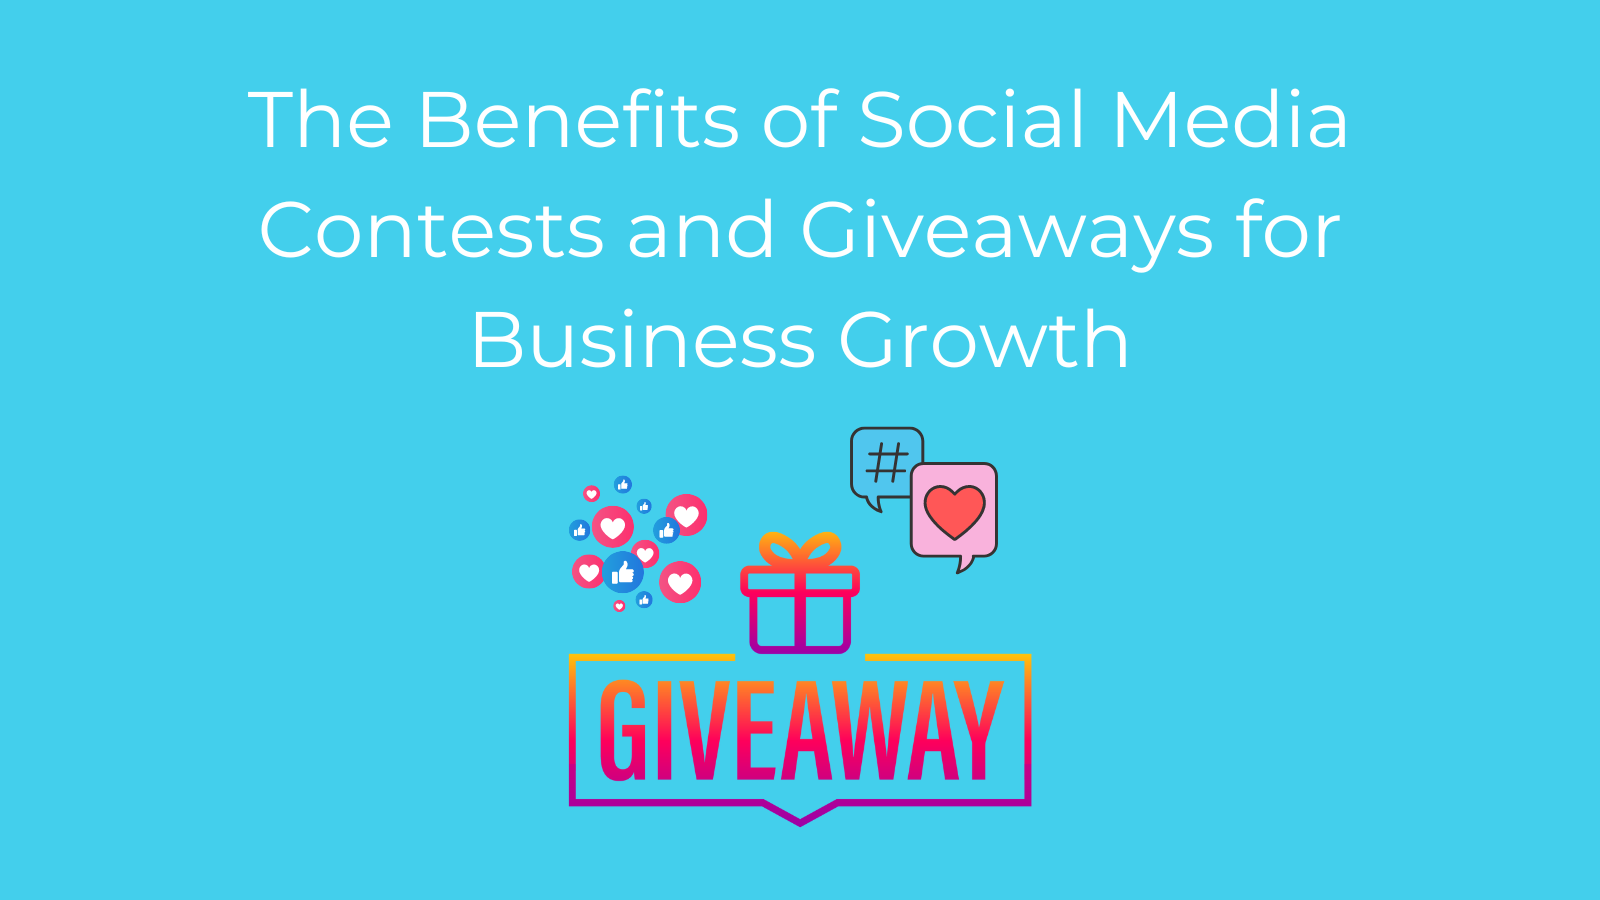 The Benefits of Social Media Contests and Giveaways for Business Growth